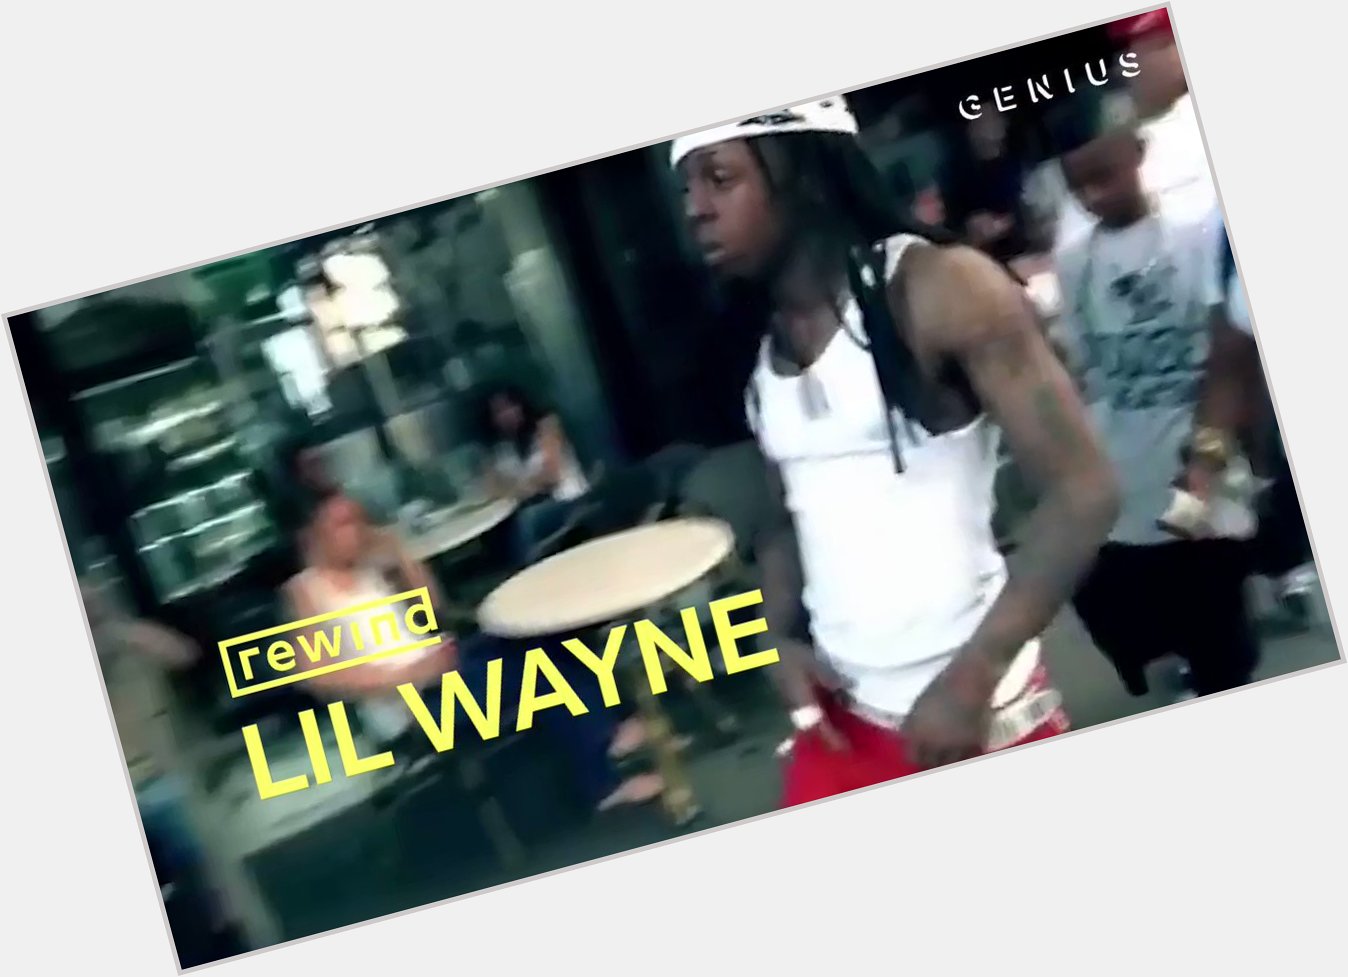 Happy birthday to Lil Wayne can\t believe we\re finally getting tha carter v tonight 